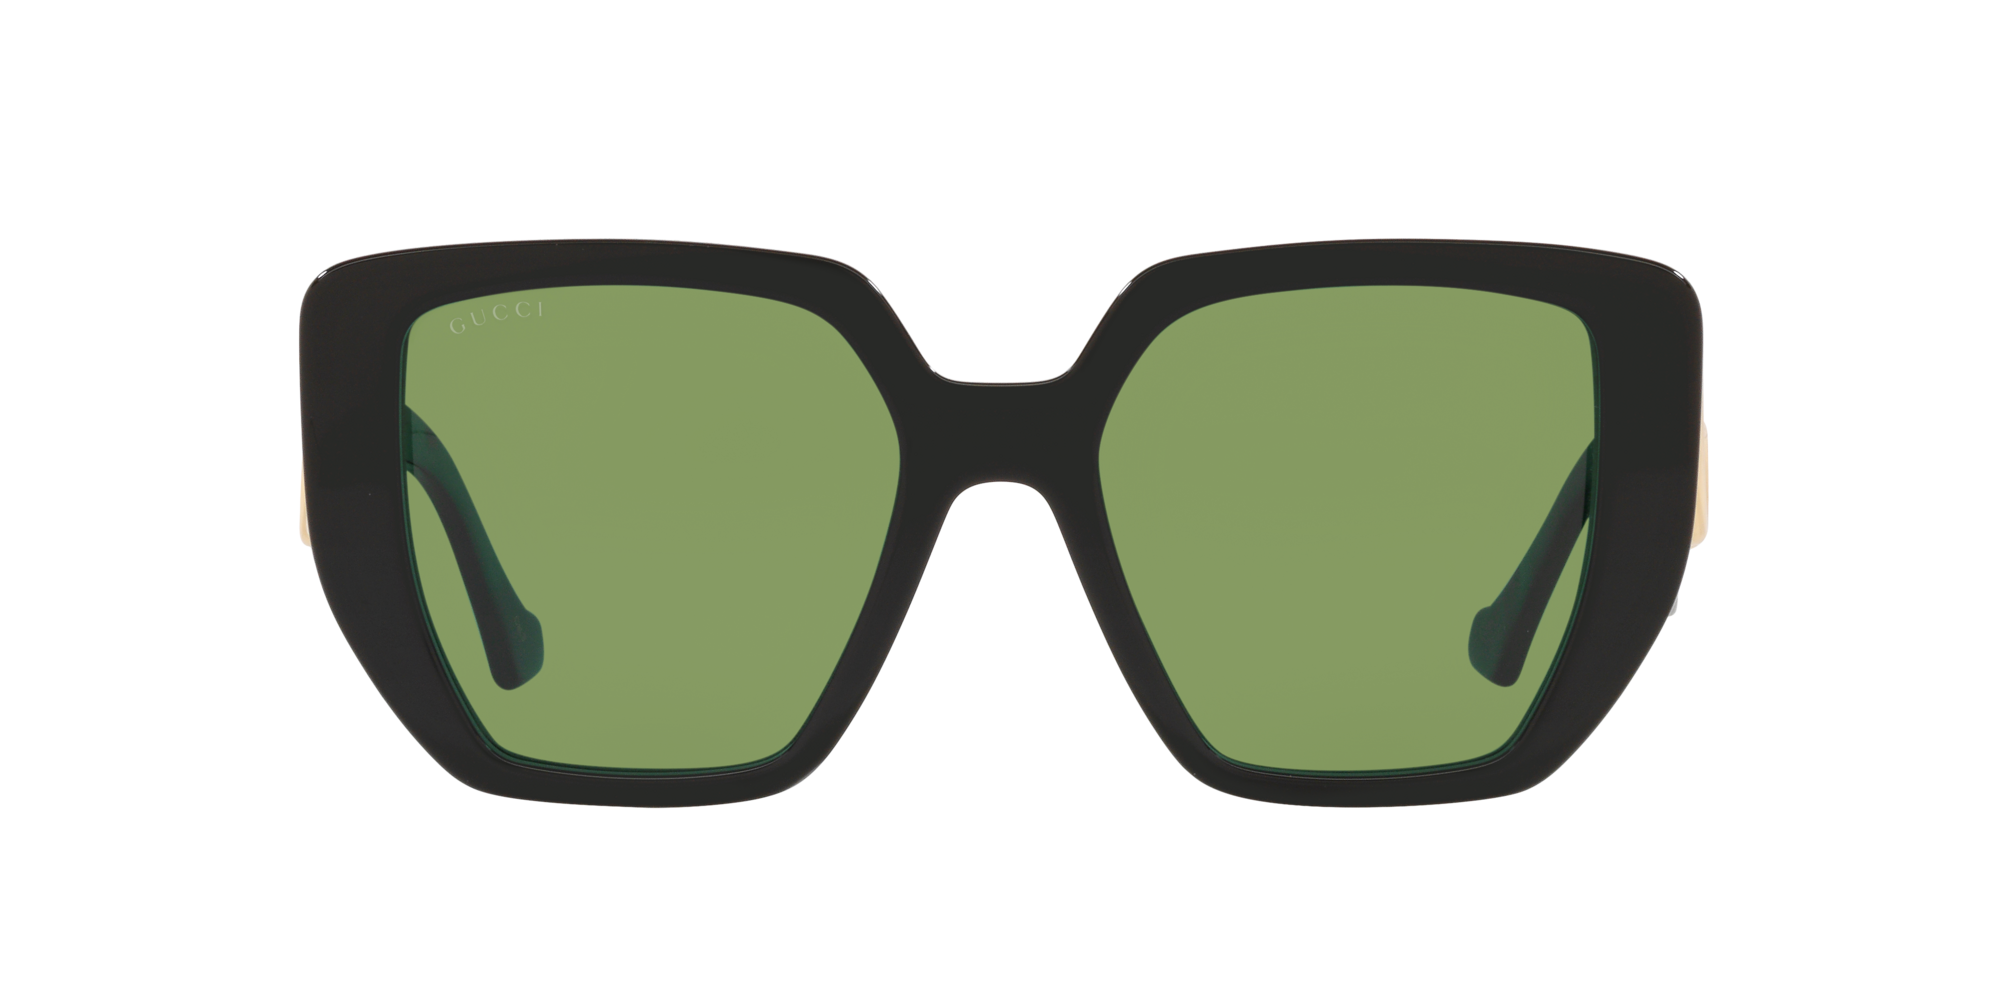 Gucci Oversized Sunglasses Tortise/Green (GG0226S-006-56)